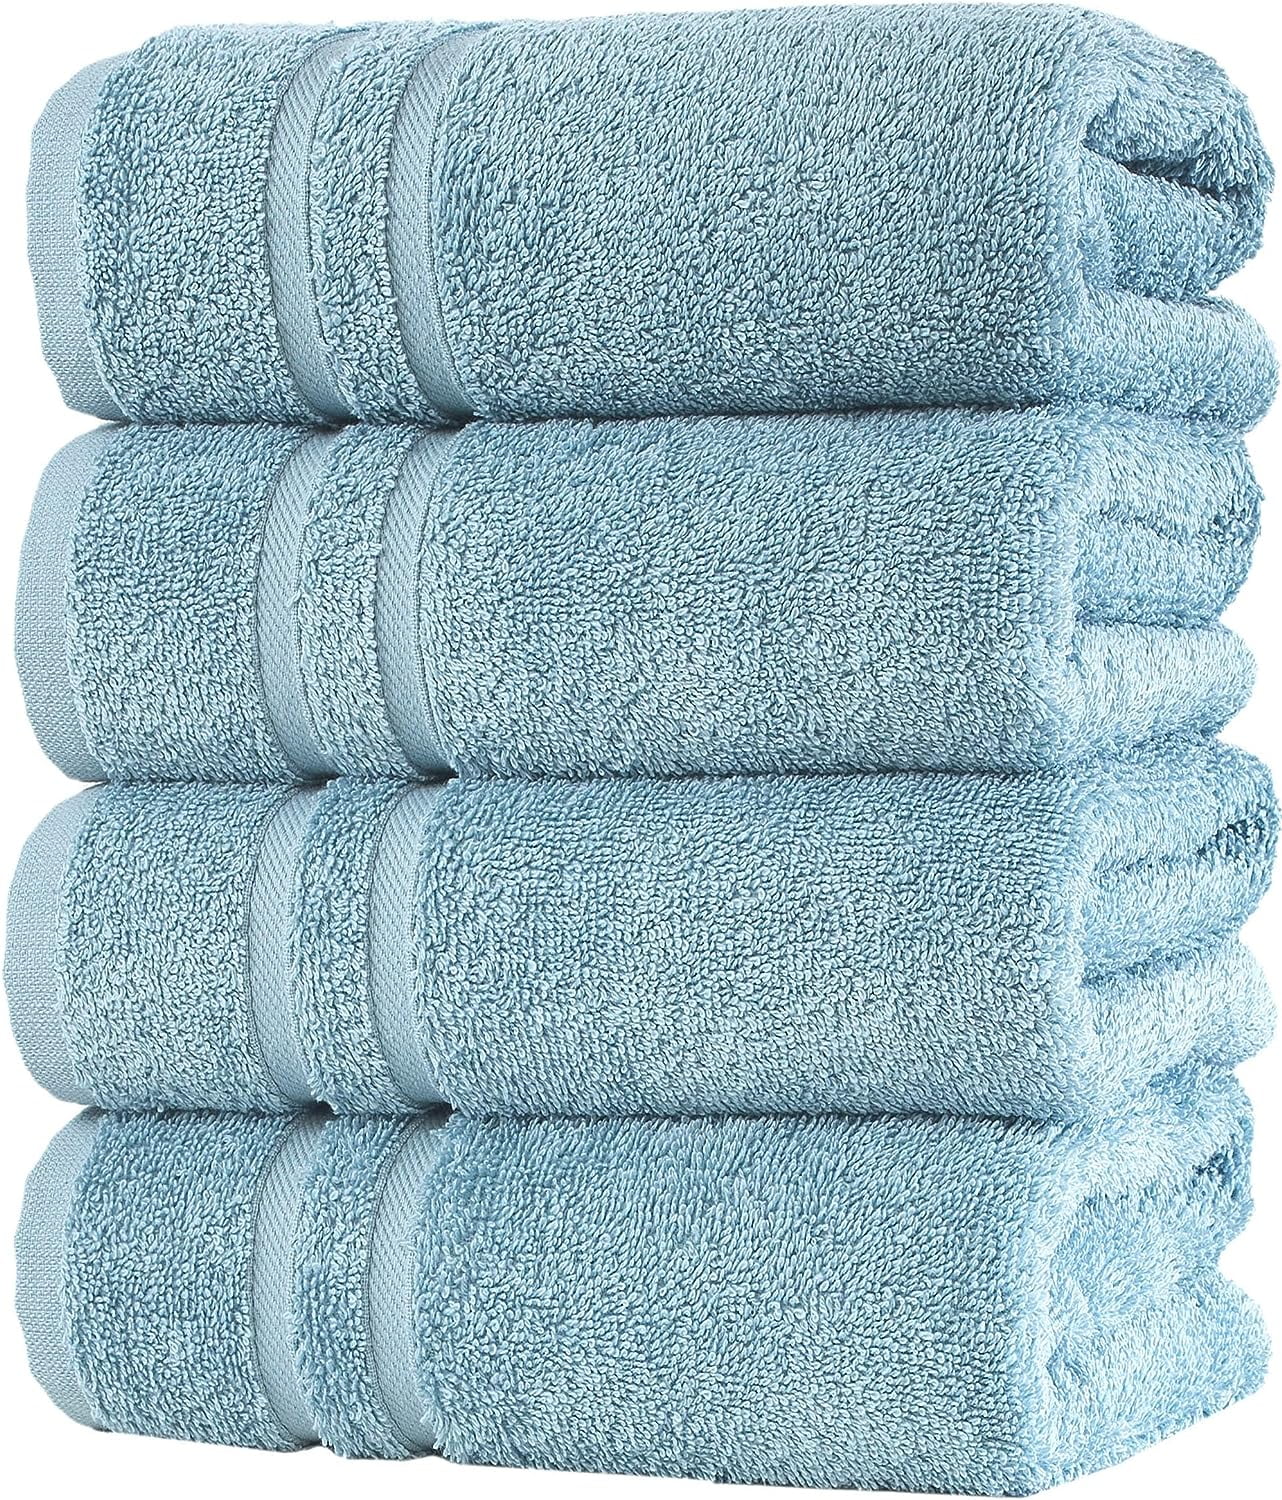 Lovely & Colorful Cotton Hand Towels ( Light Blue, 2-Pack, 14 inch x 29 inch) for Bath, Hand, Face, Gym and Spa